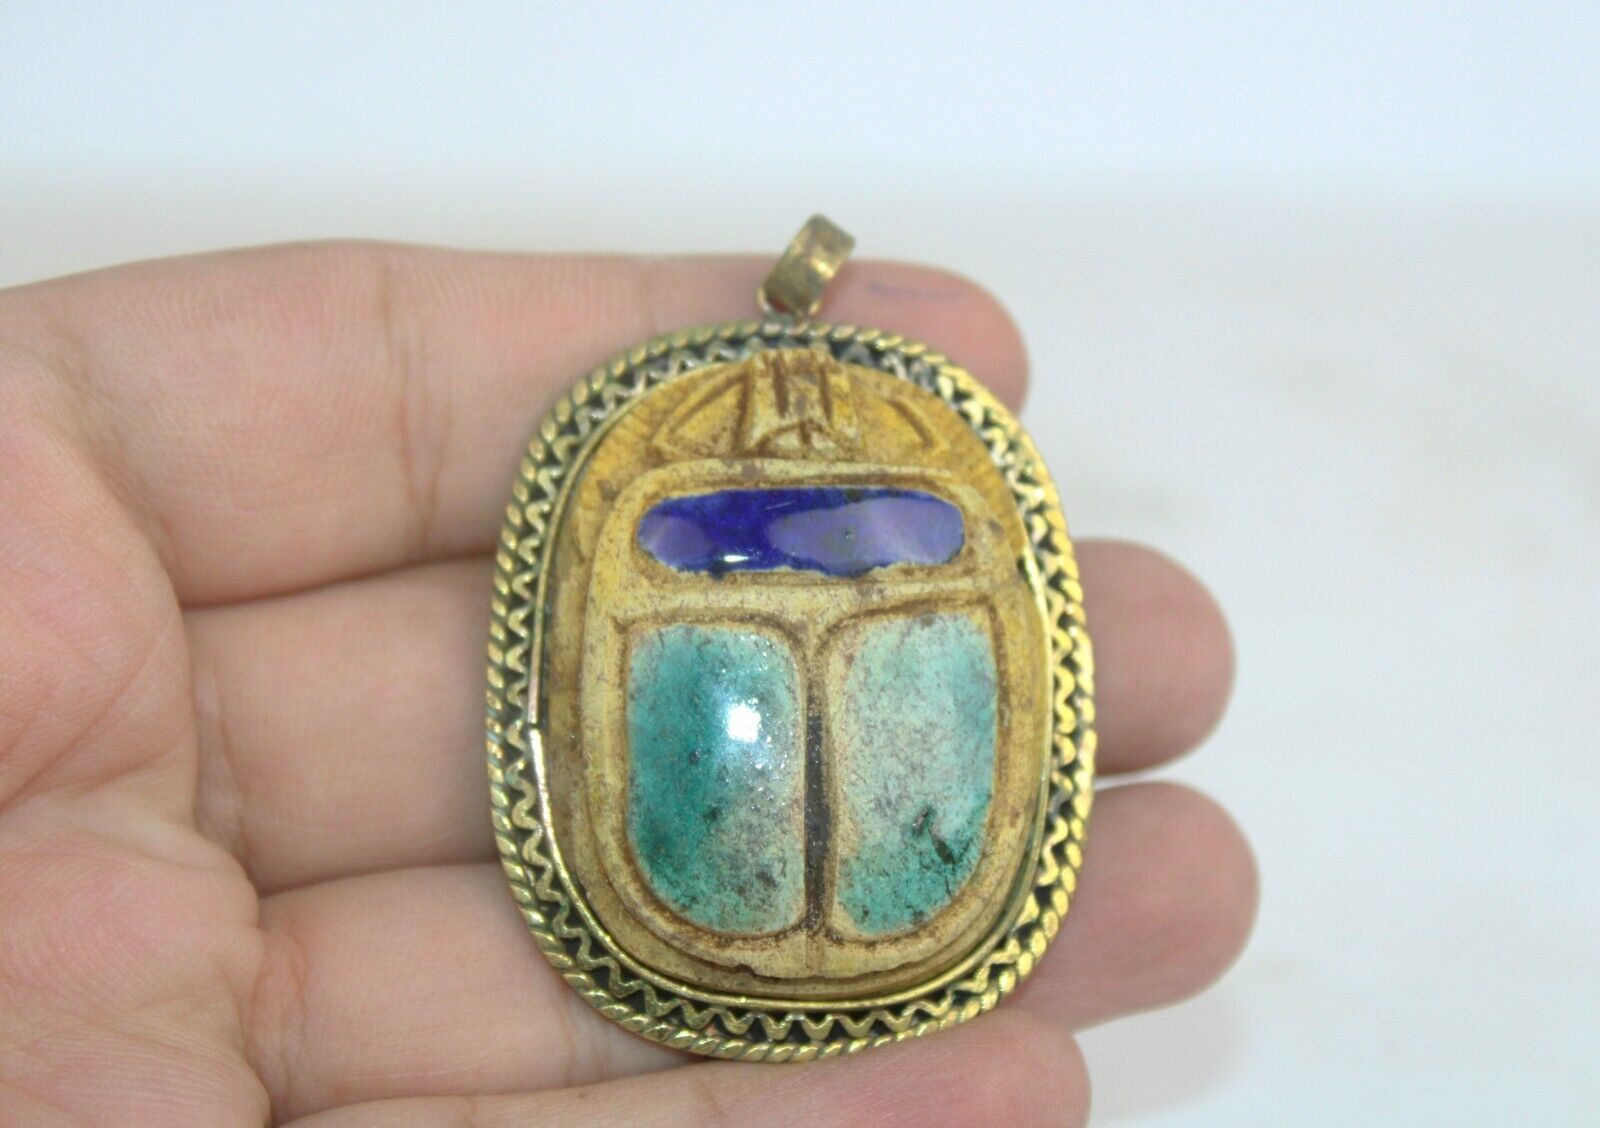 Rare Ancient Egyptian Carved Stone Scarab Amulet For Protection BC Egyptology